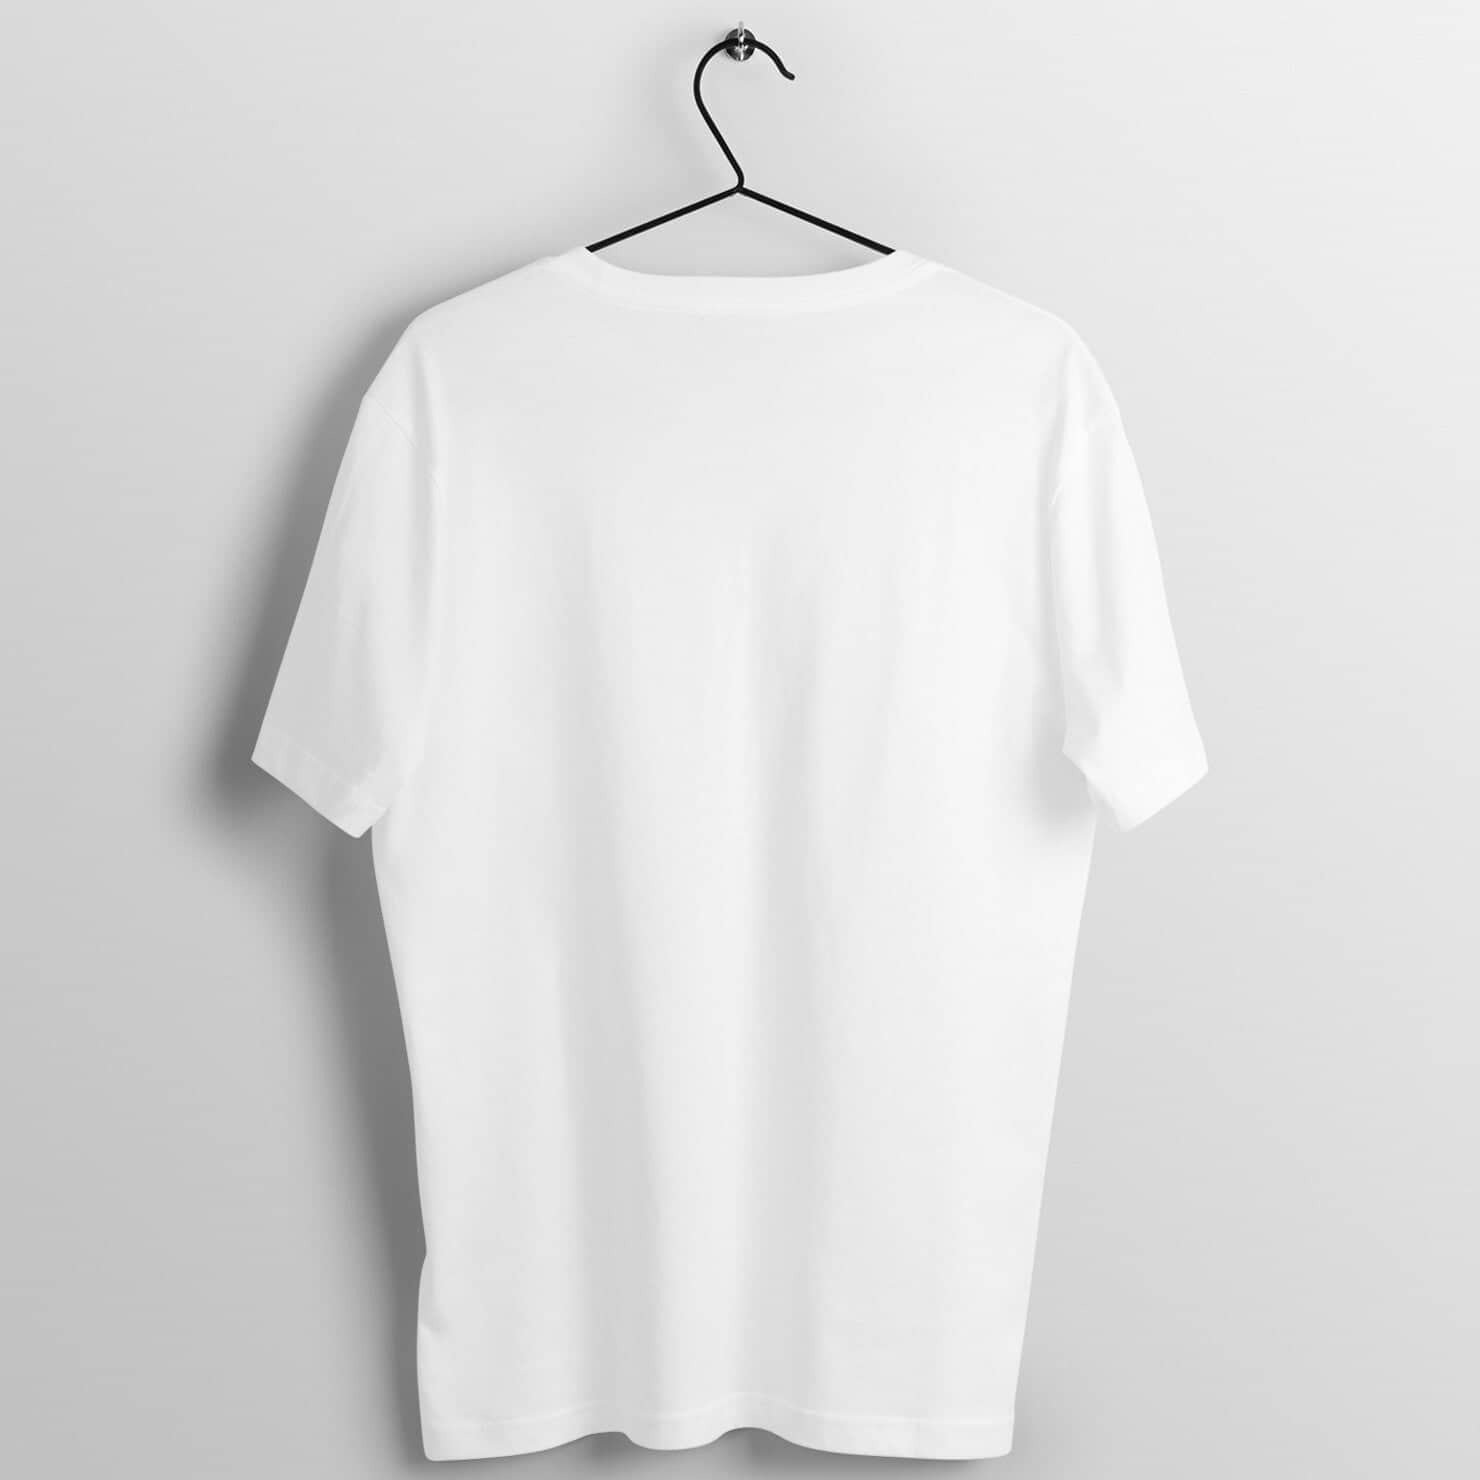 Have A Nice Day Supreme White T Shirt for Cat Loving Men and Women Printrove 